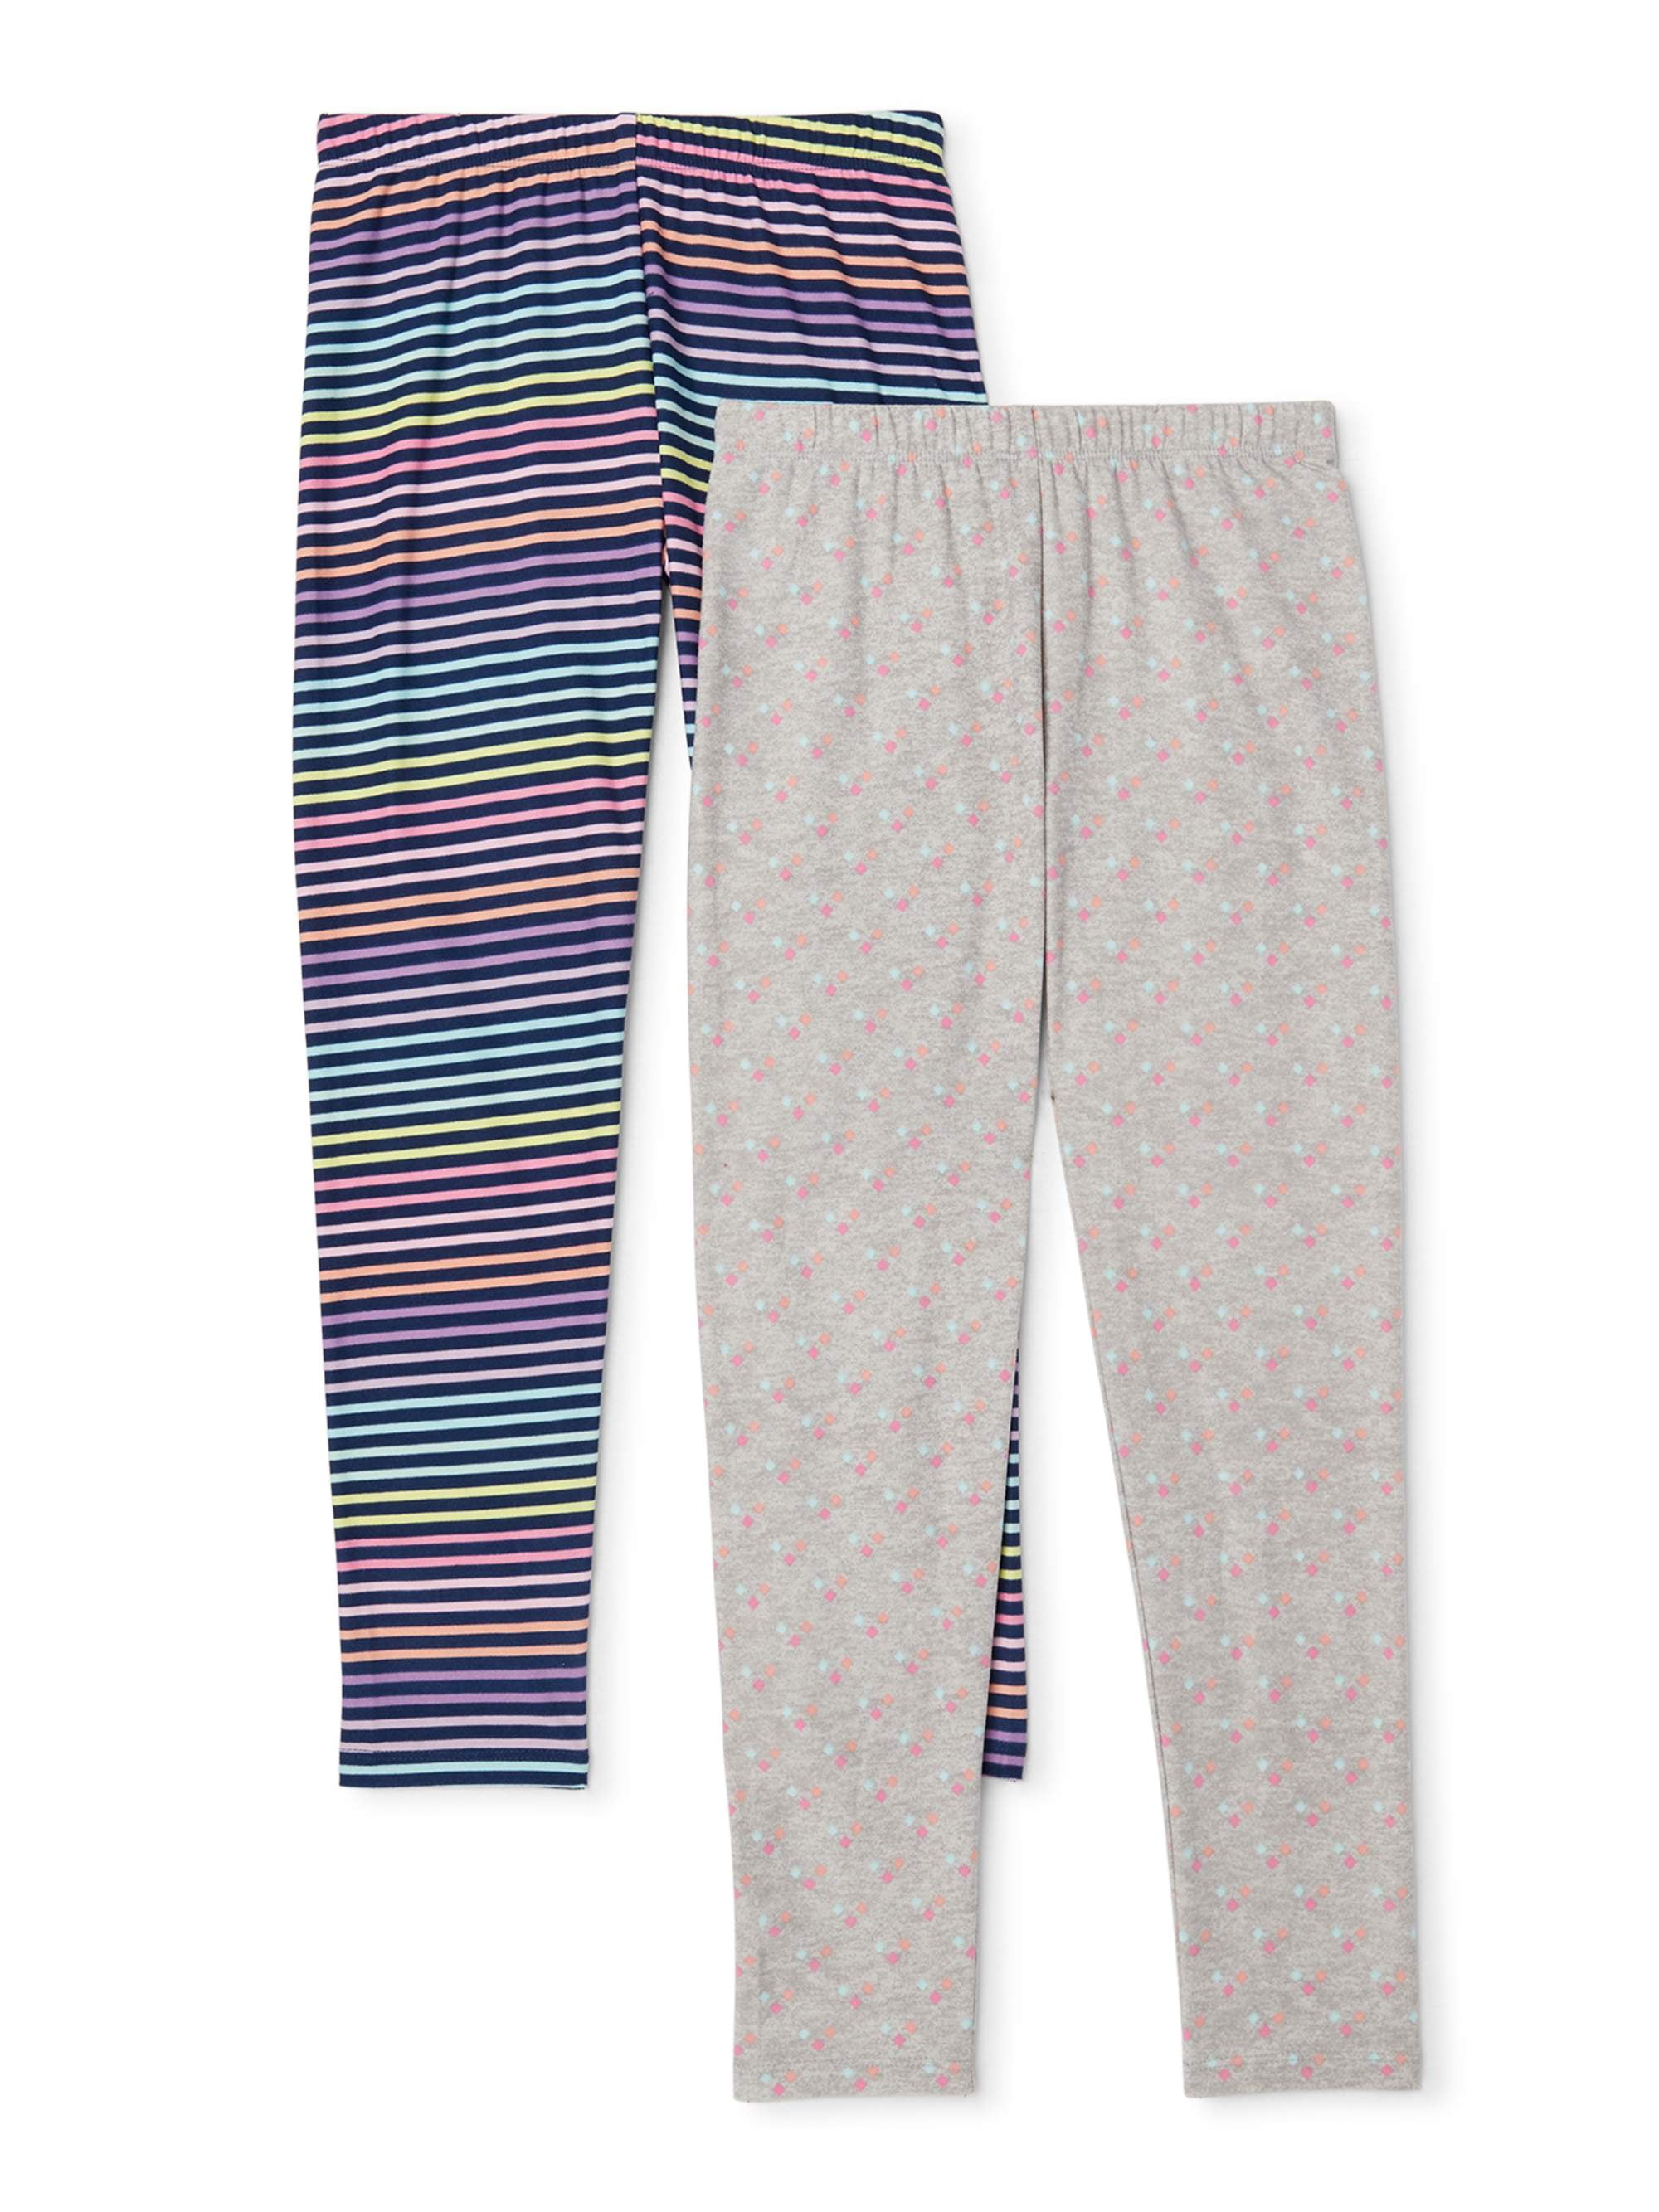 p.s.09 from Aeropostale Girls 4-16 Stripe and Printed Leggings, 2